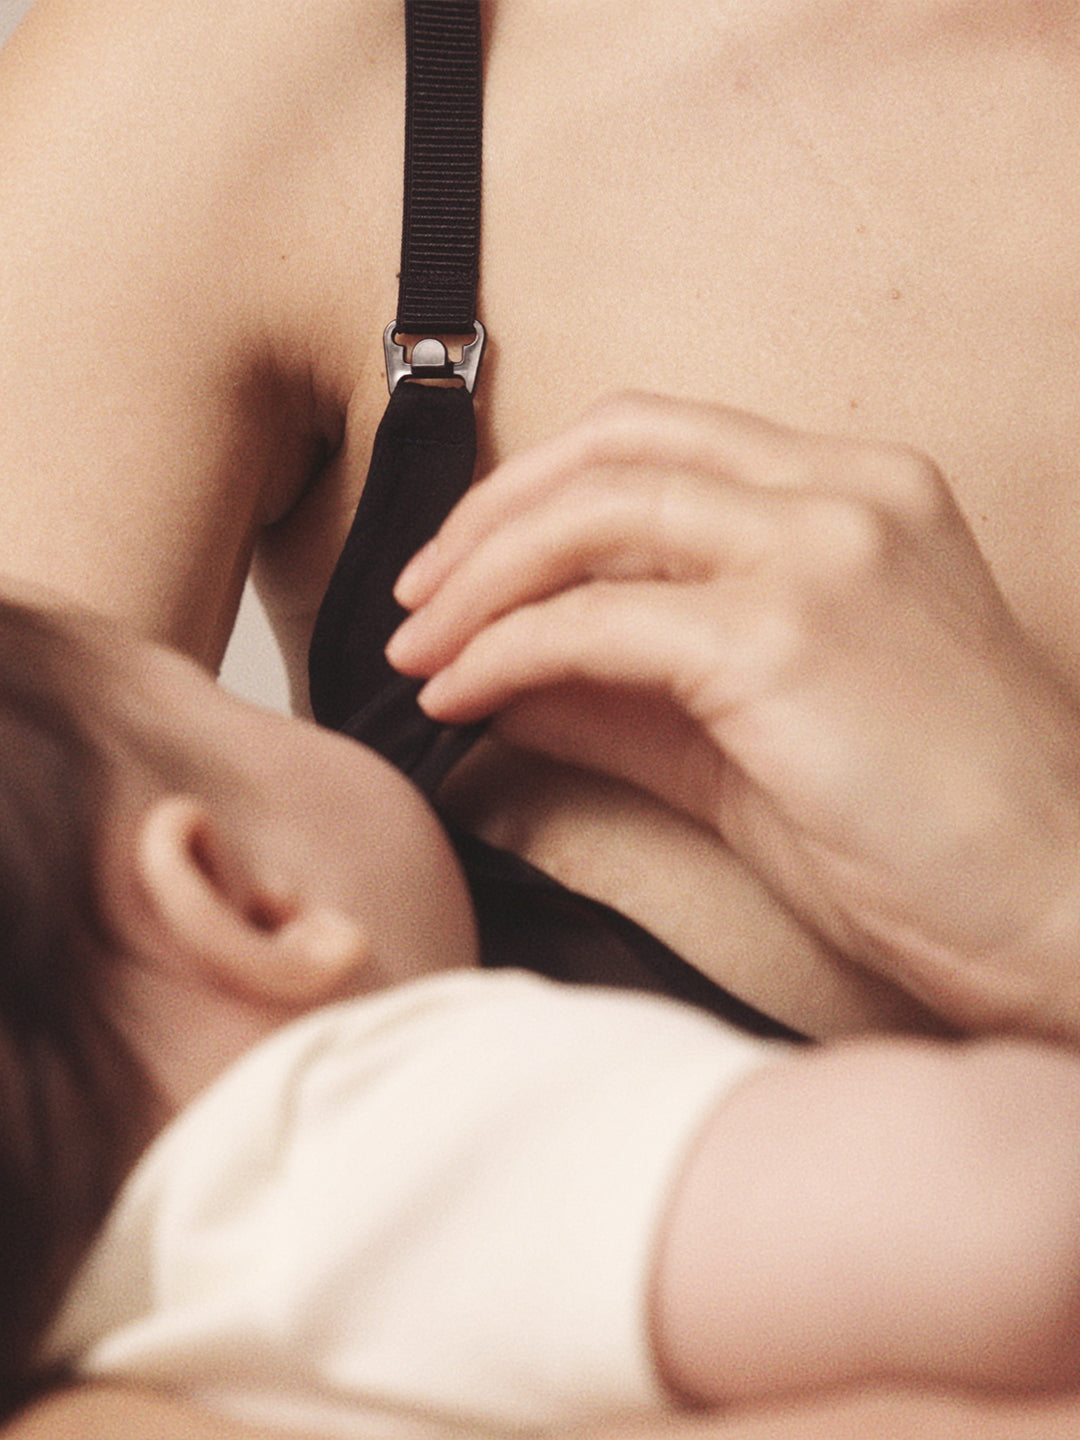 Close up of woman unclasping a nursing bra to nurse her child to